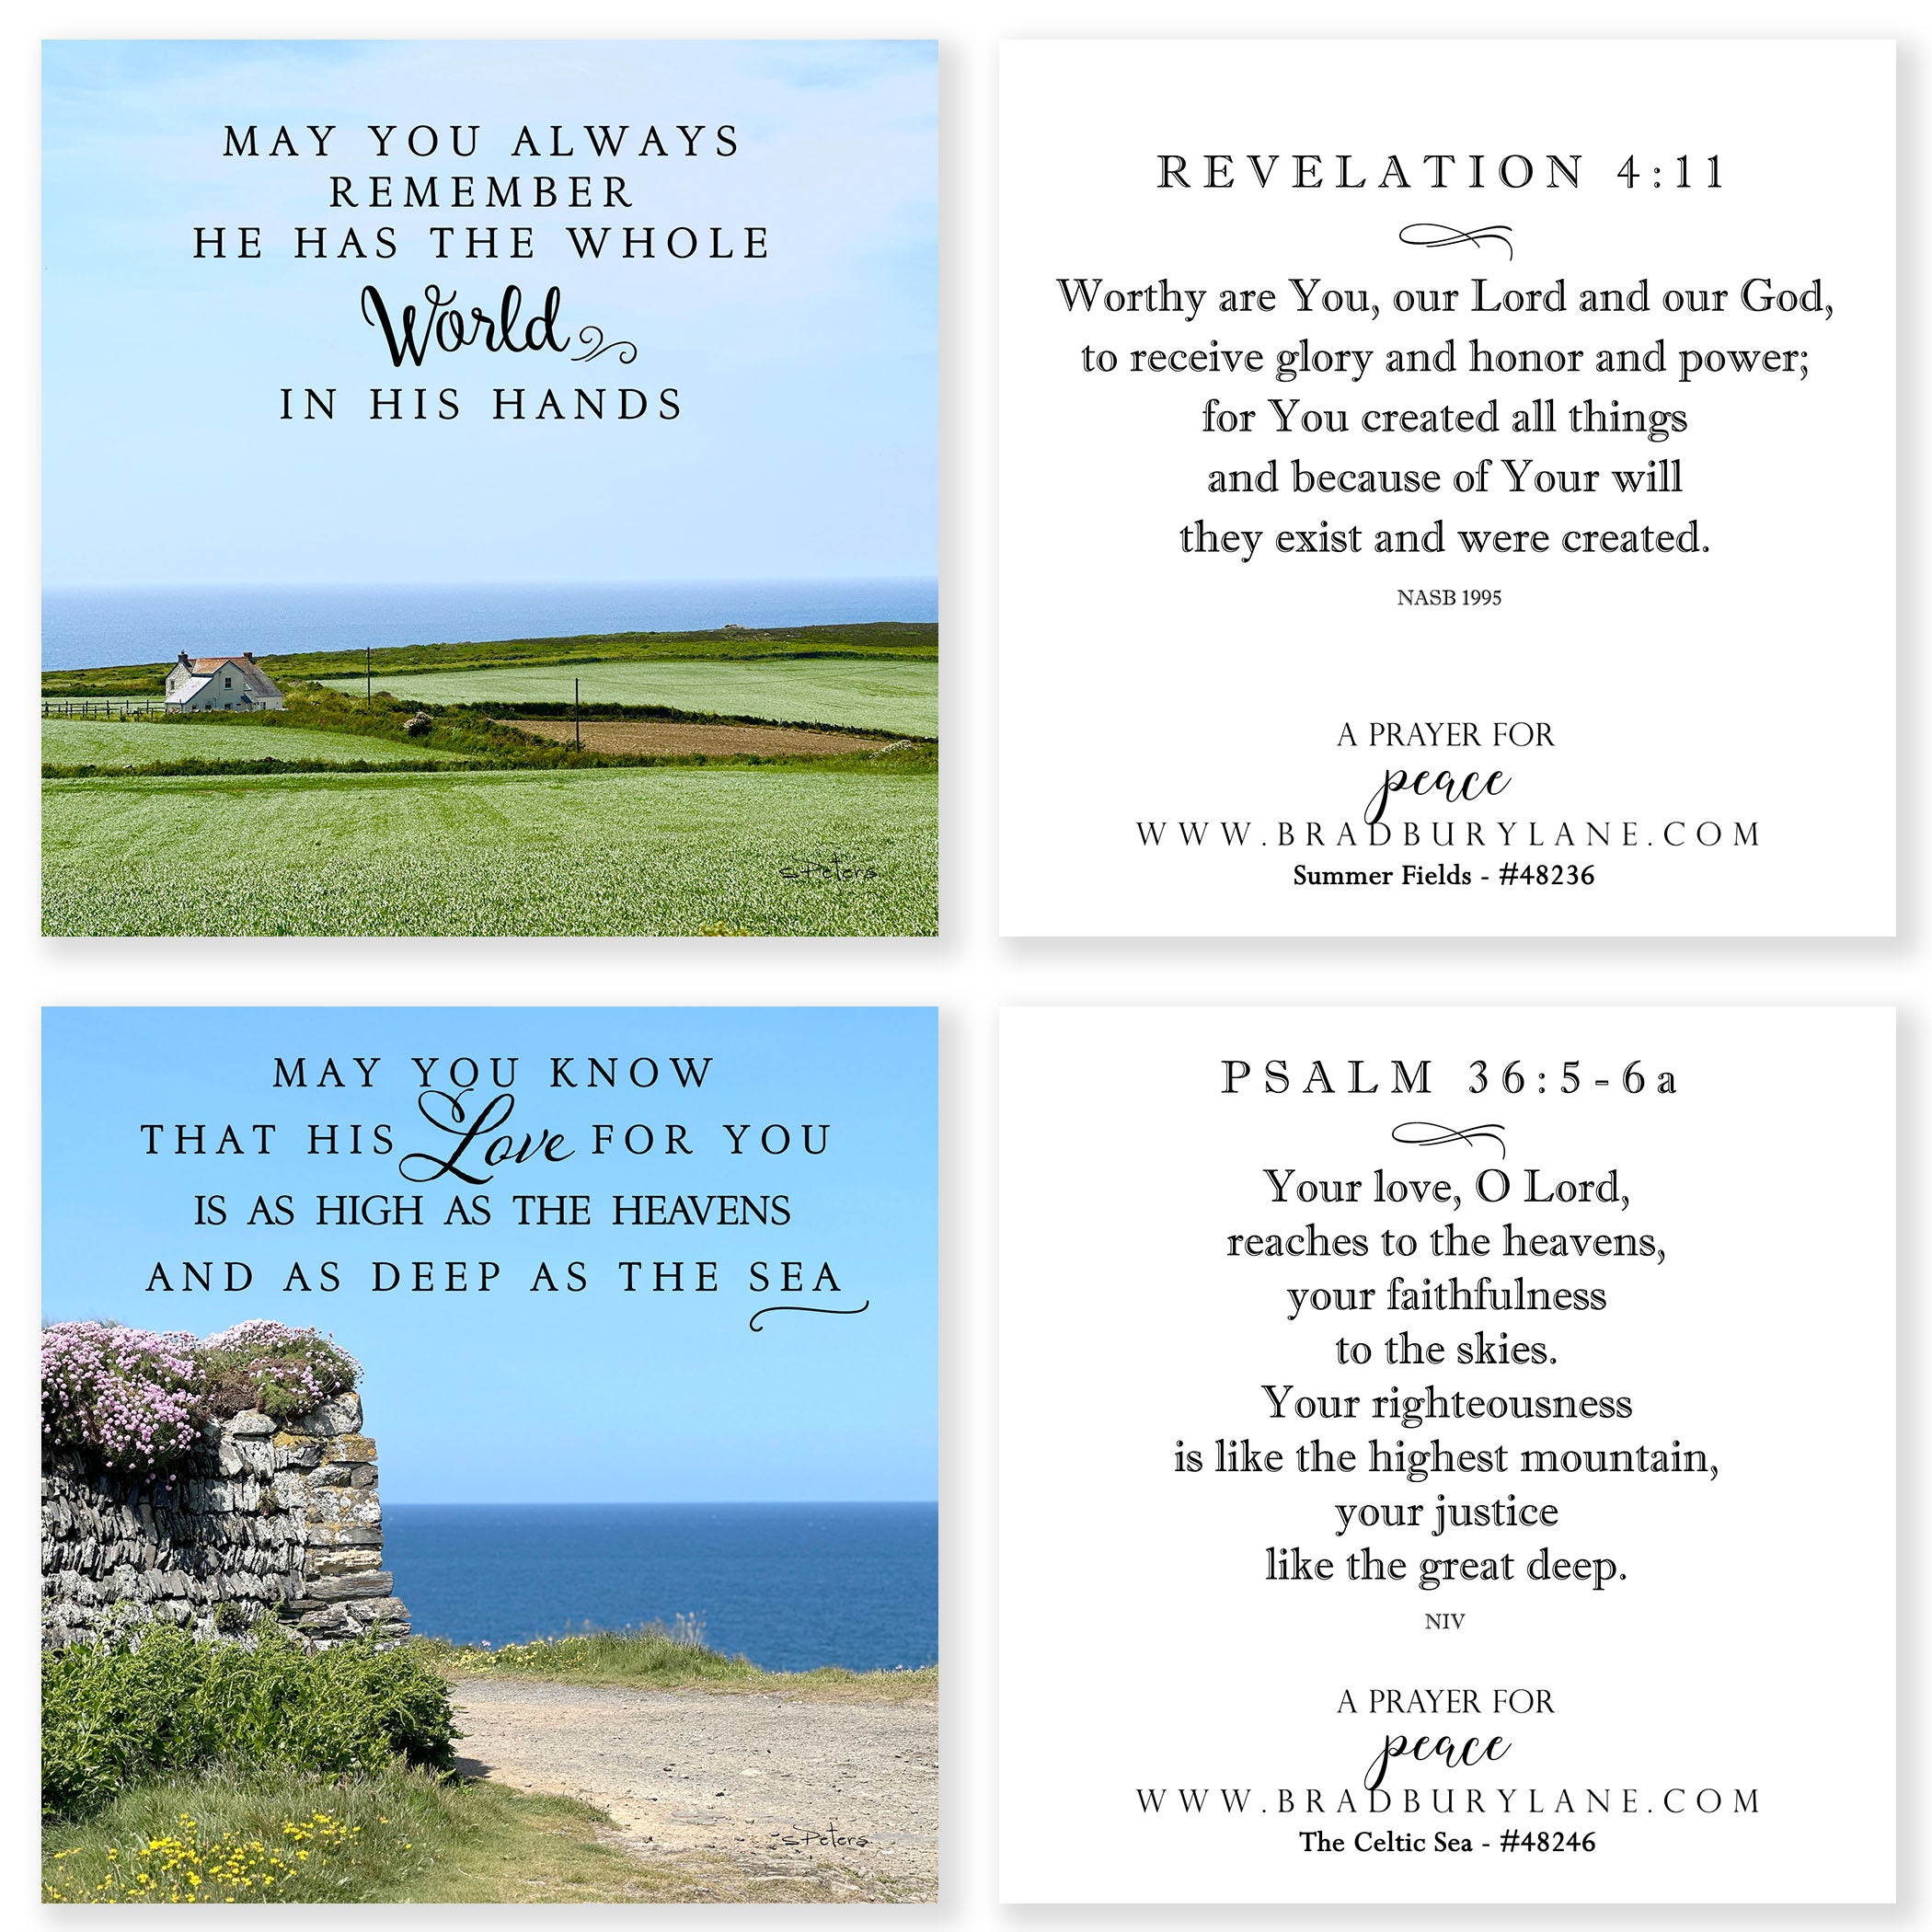 31 Days of Prayers for You Boxed Mini Print Collection (Version 1) w/Acrylic Holder